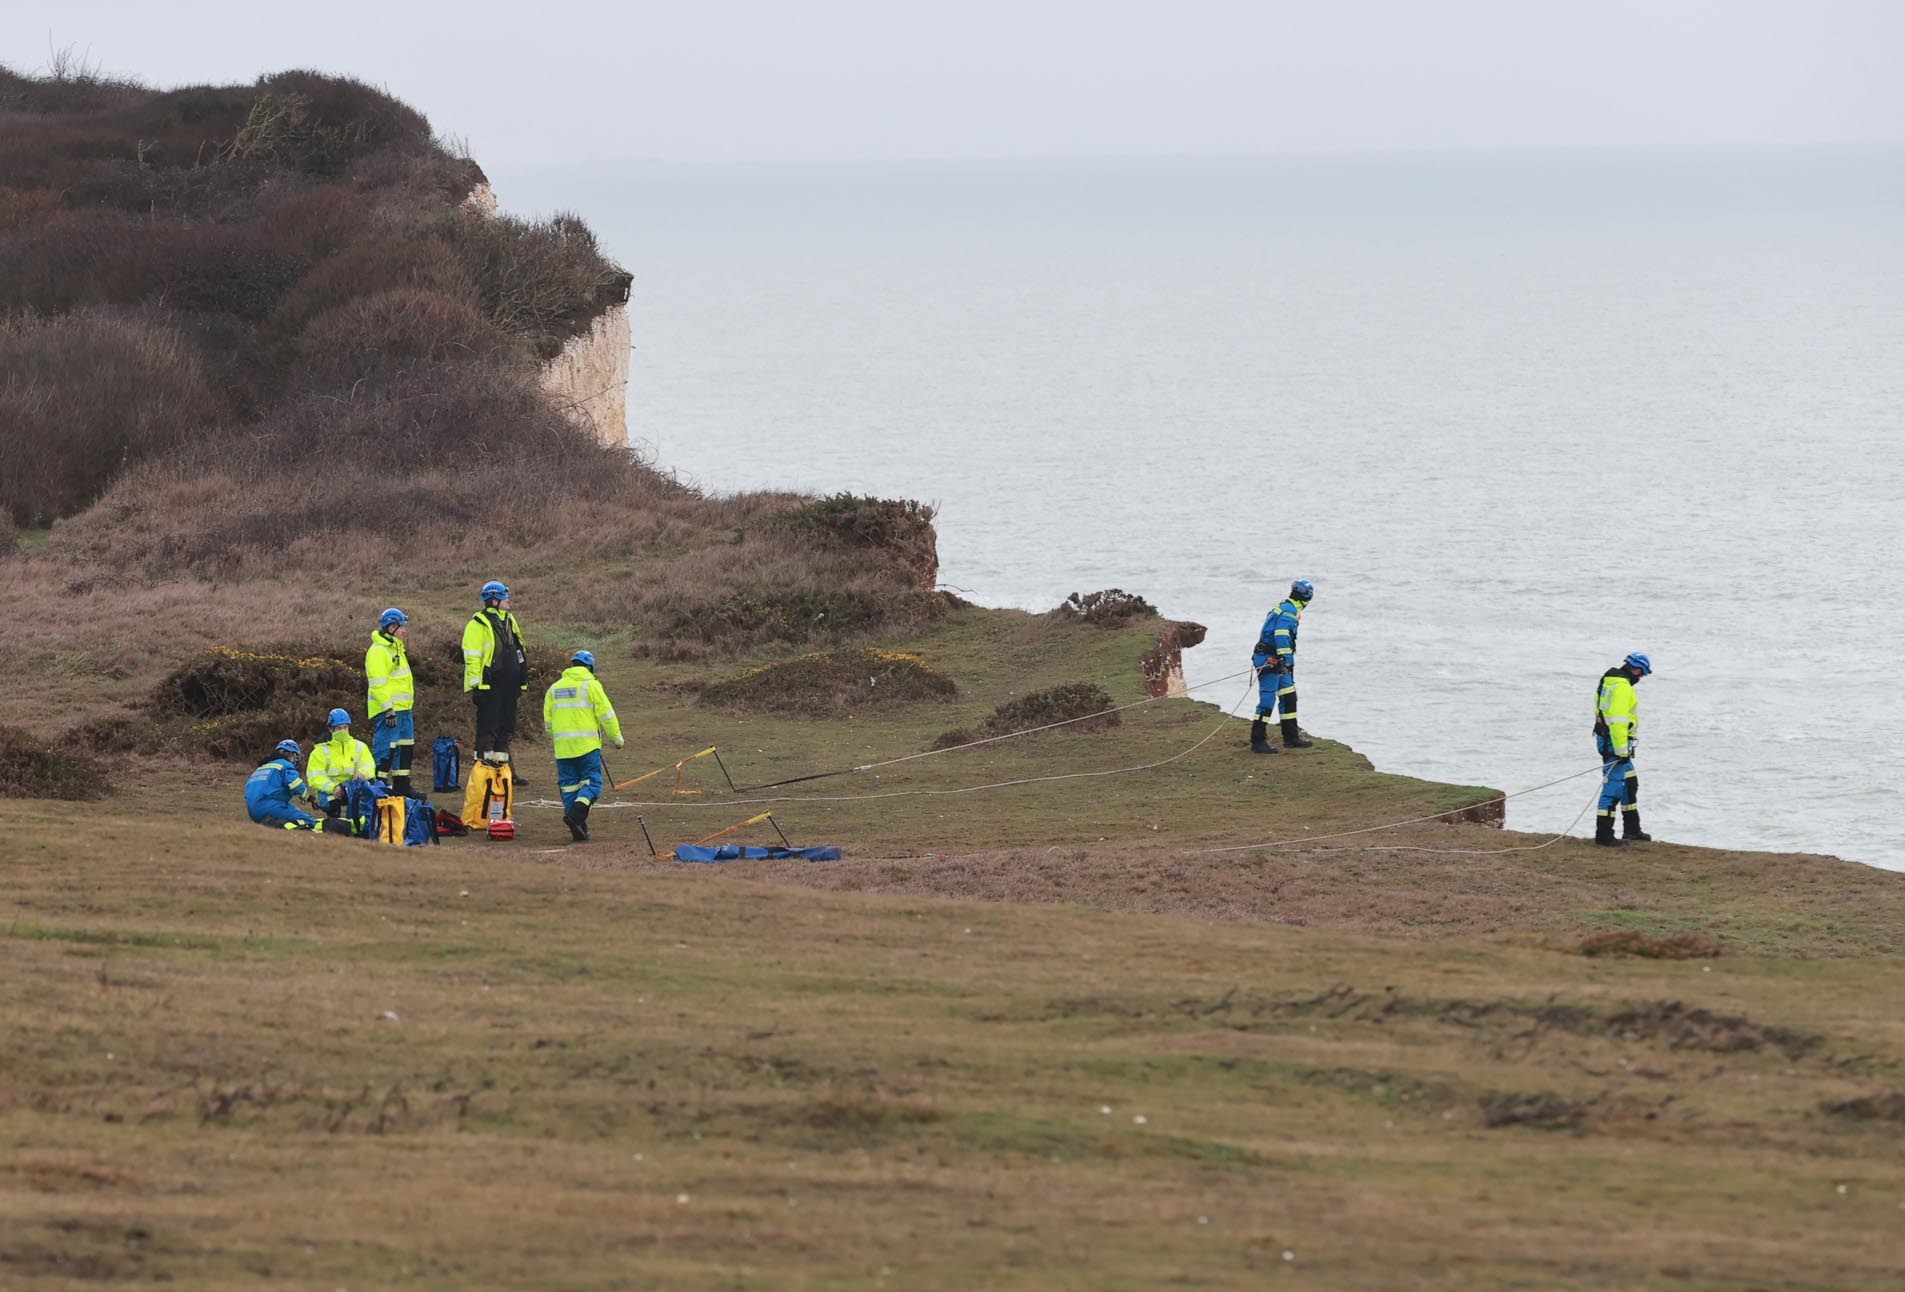 An enormous rescue operation was launched after an Eastbourne lifeboat capsized off Birling Gap